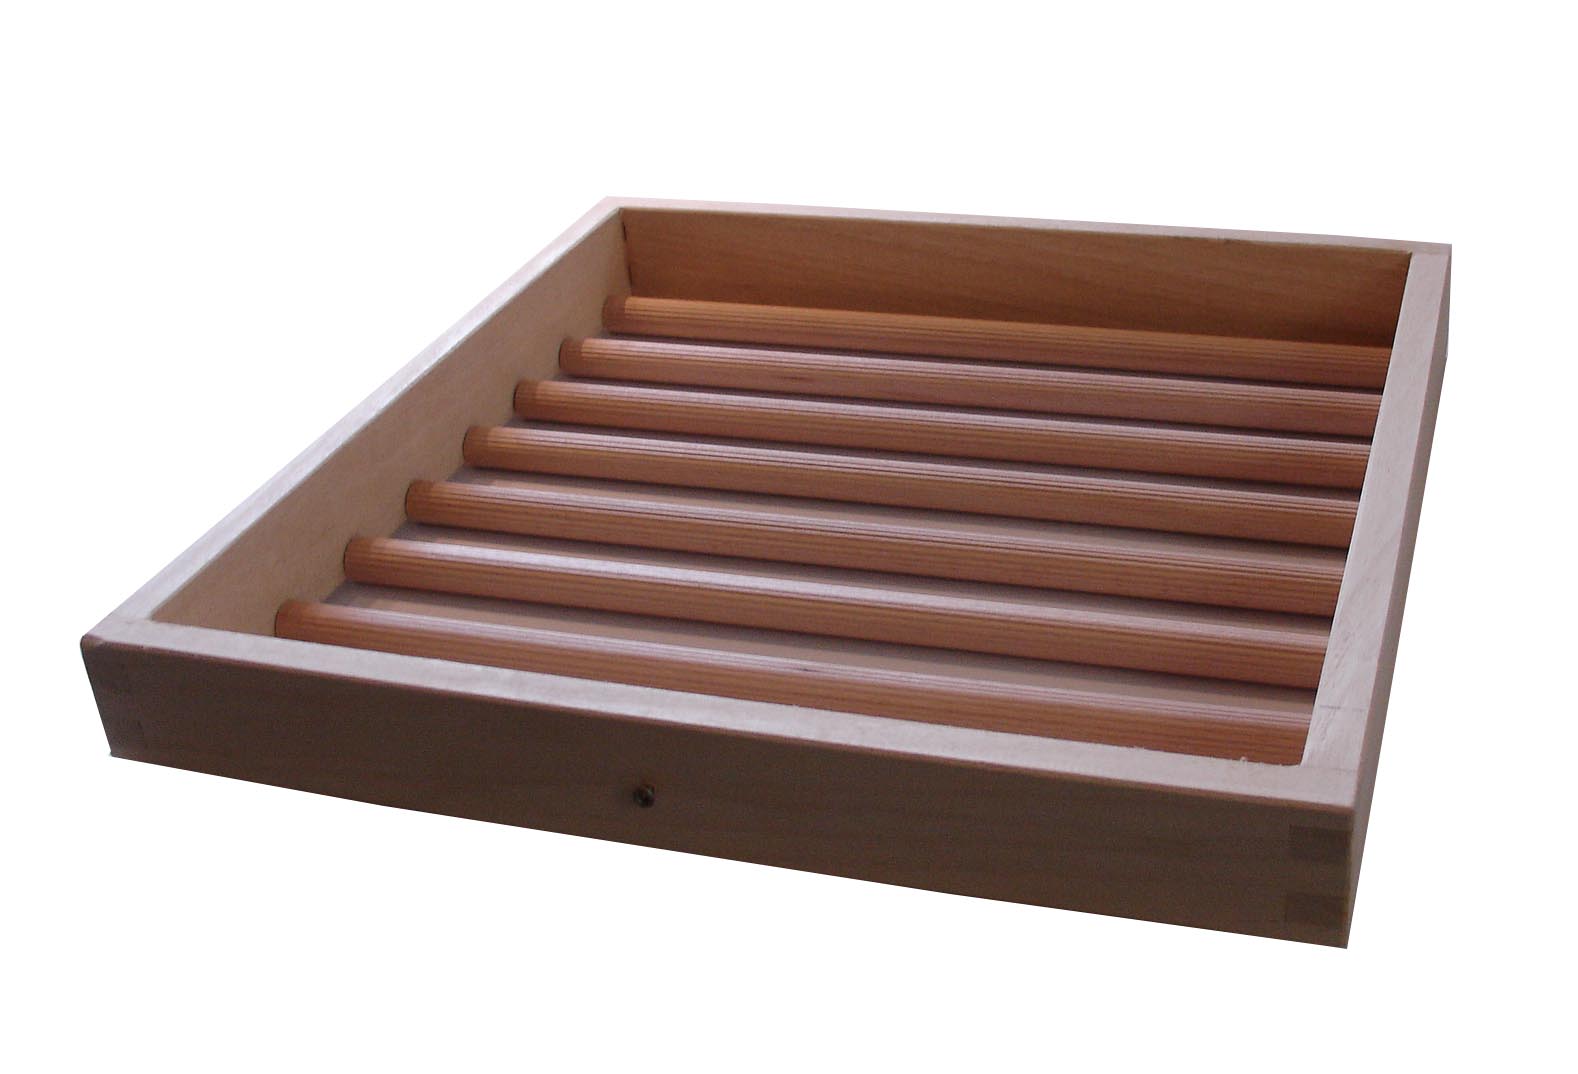 Surcharge: choice of tray (size 1, wooden)